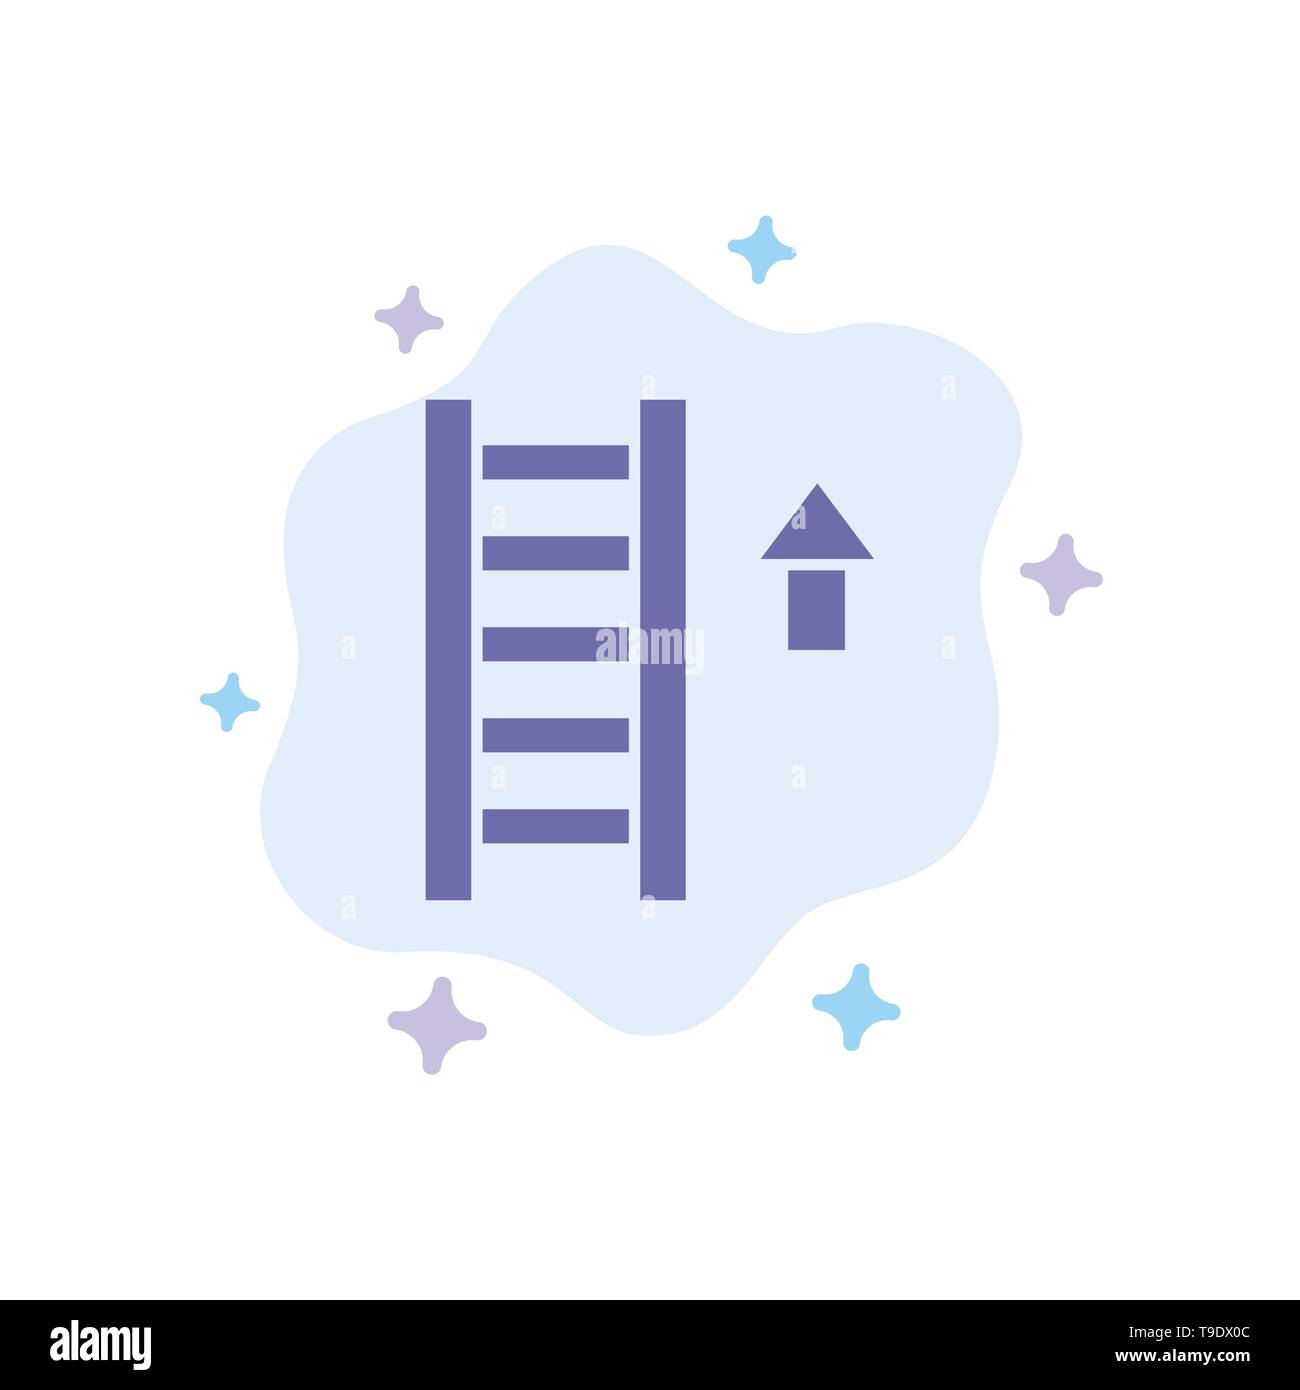 Ladder, Stair, Staircase, Arrow Blue Icon on Abstract Cloud Background Stock Vector